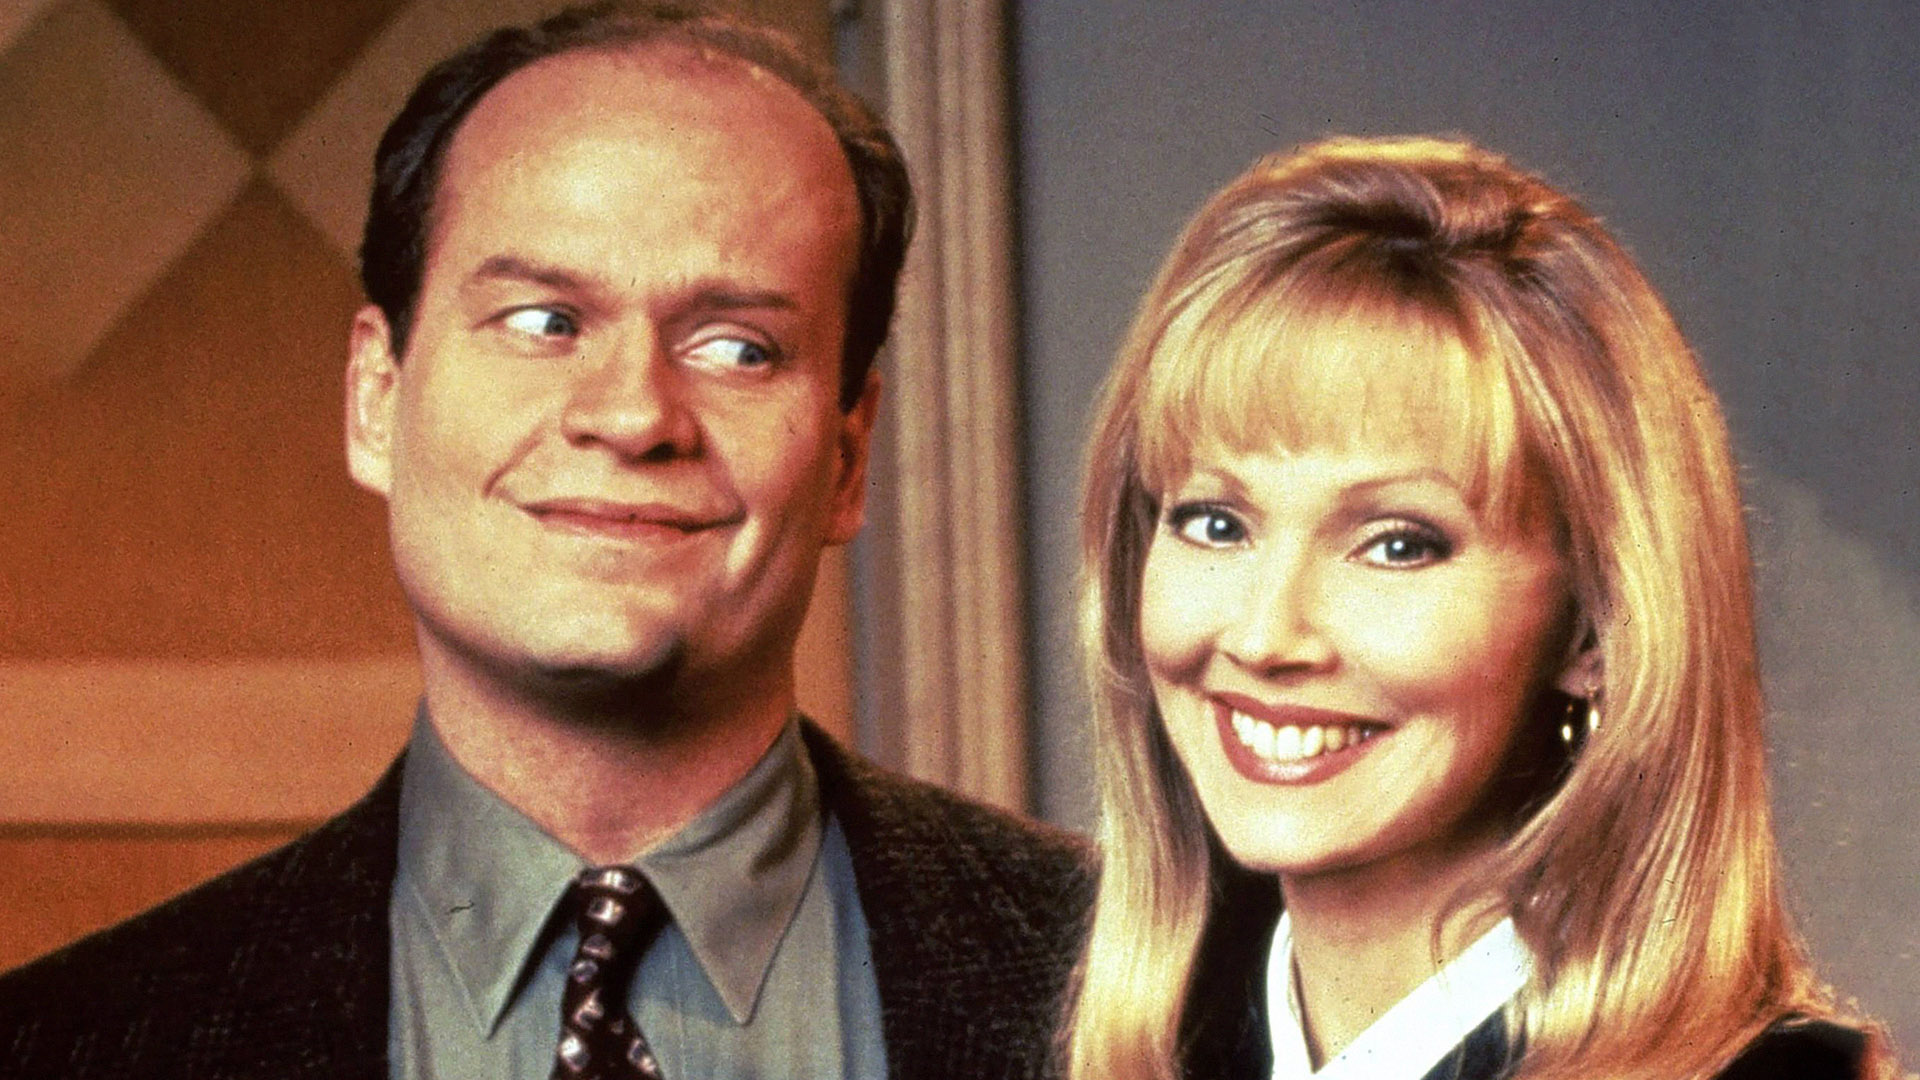 5 Hilarious Scenes That Made Frasier So Iconic, Ranked